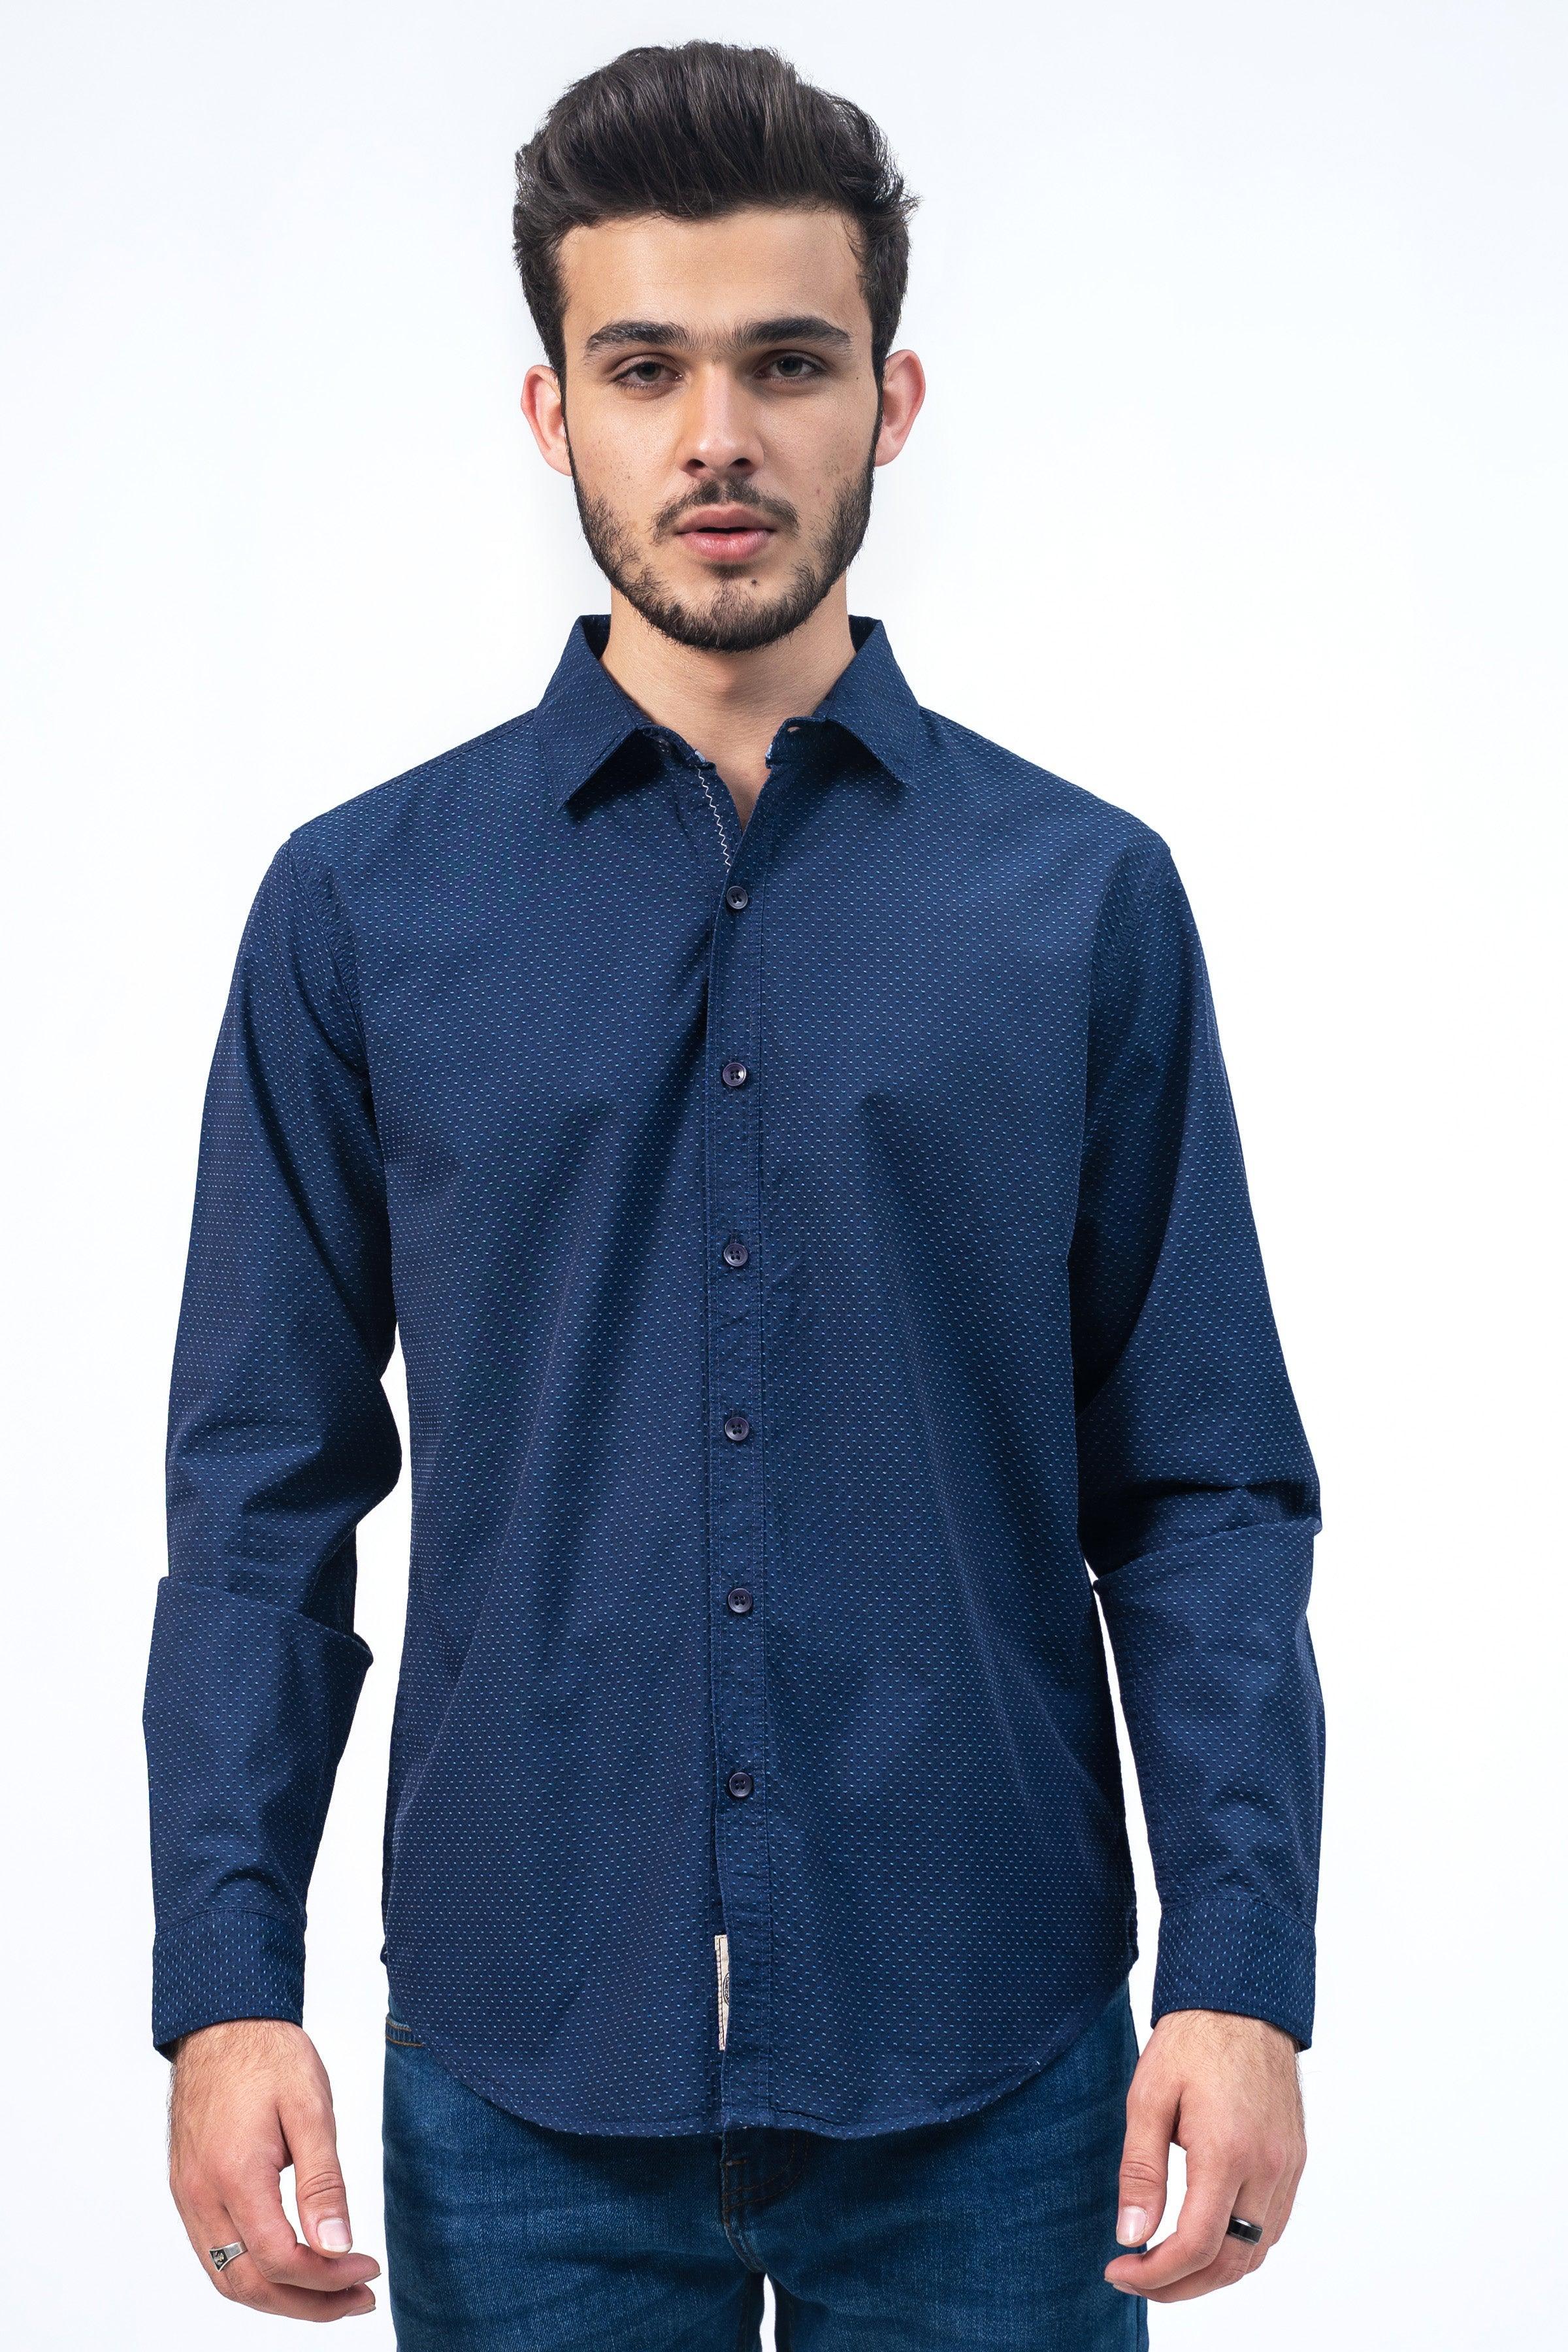 CASUAL SHIRT BLUE SELF TEXTURED at Charcoal Clothing